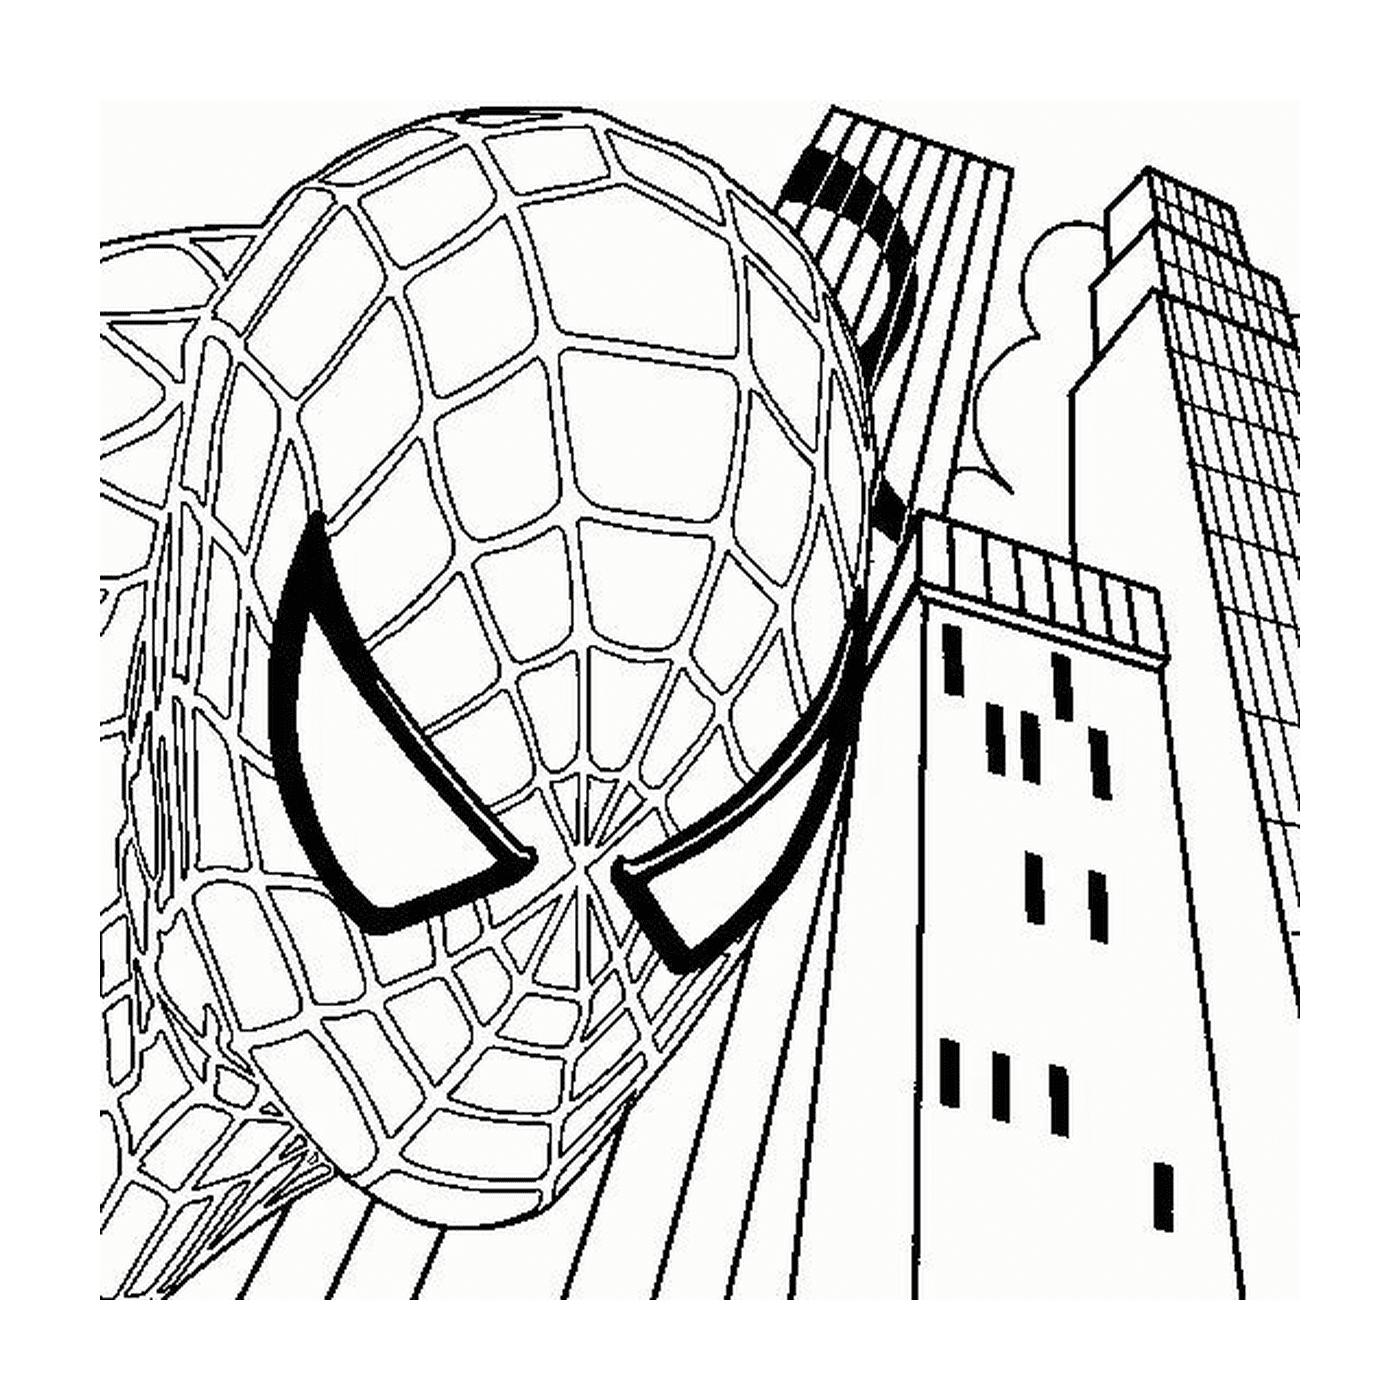  Spiderman downtown 